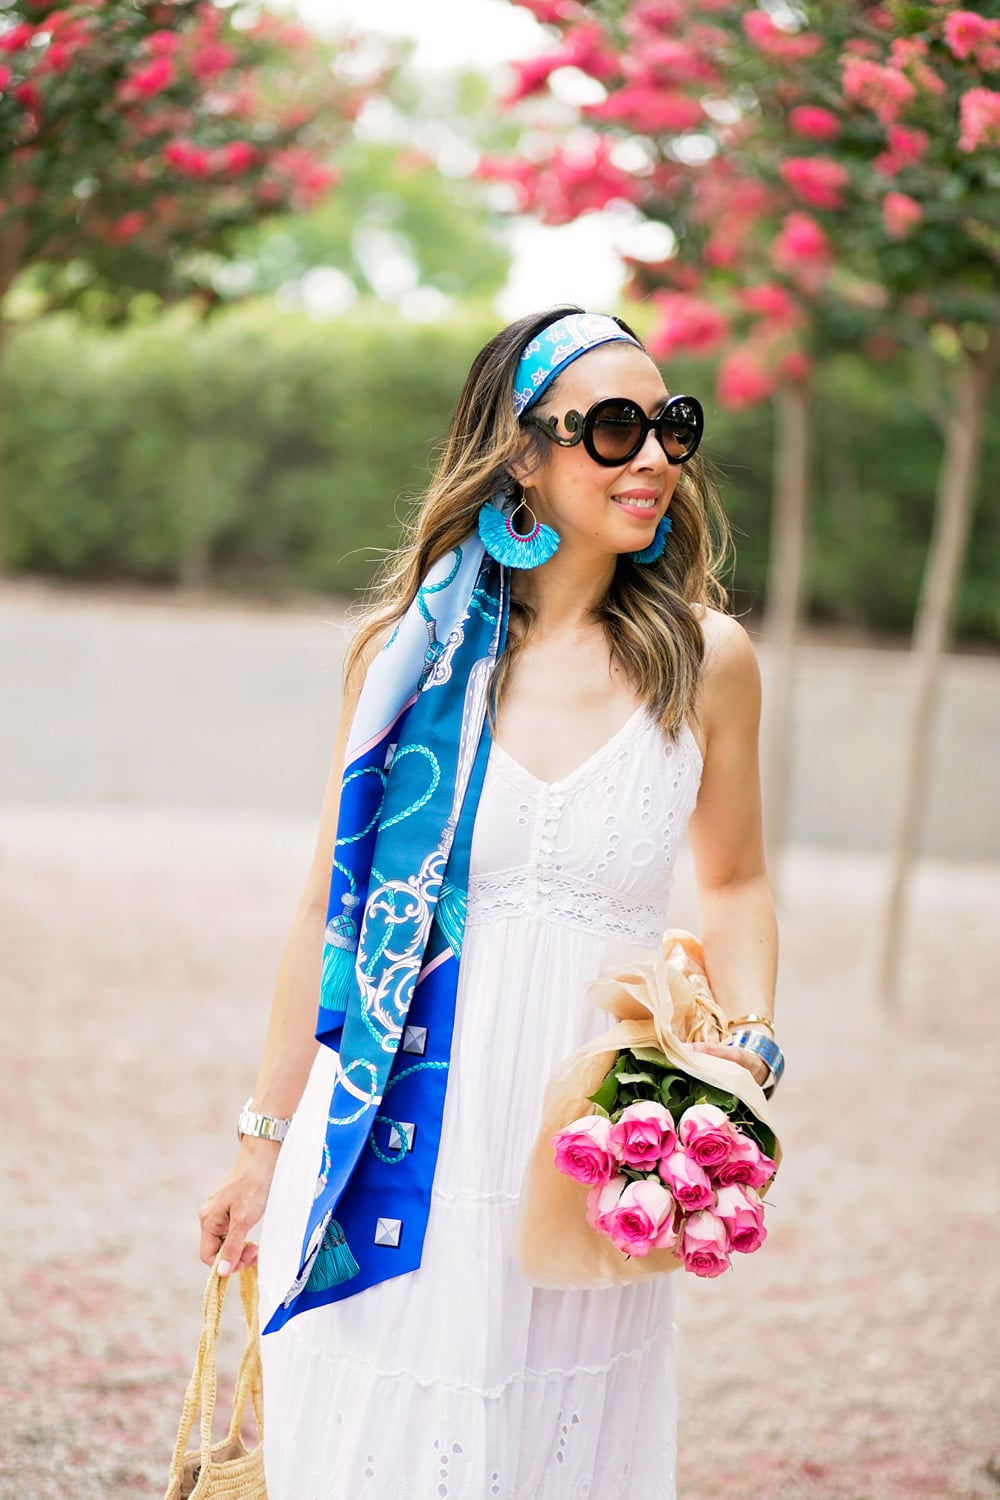 hermes les cles maxi twilly head scarf white eyelet maxi dress figue gypsy turquoise earrings prada baroque sunglasses santorini inspired vacation outfit